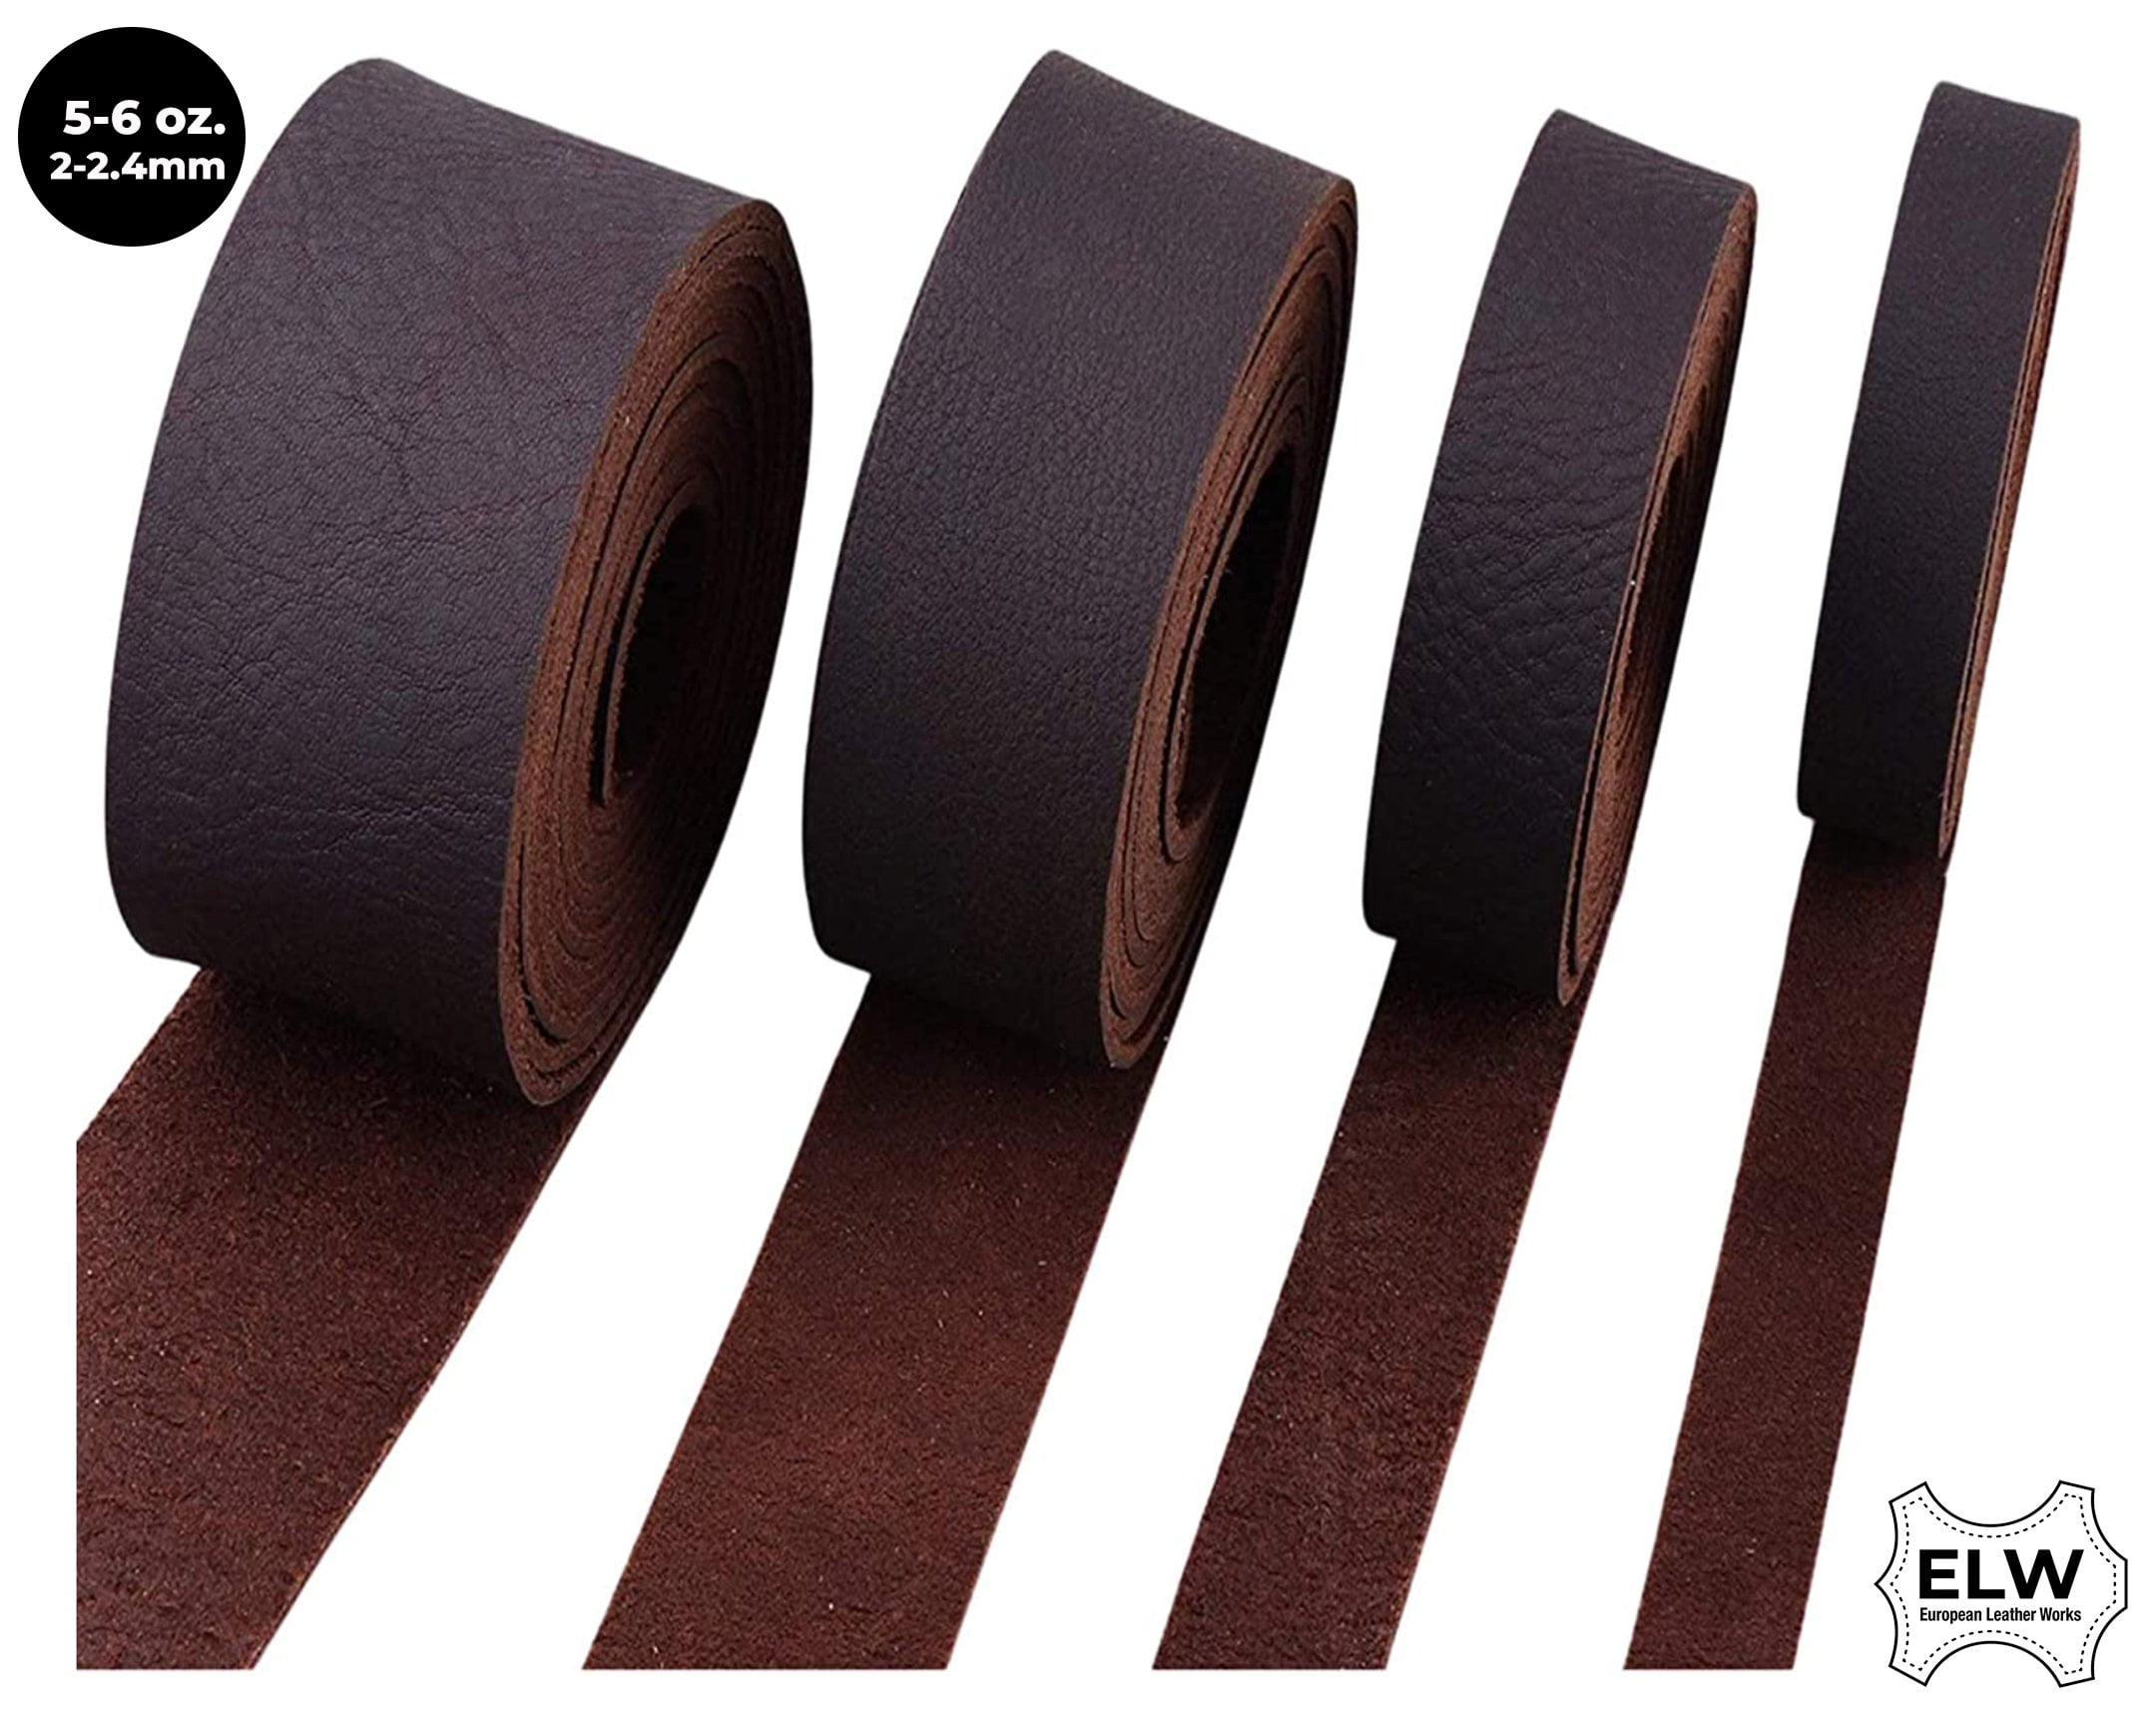 European Leather Work 8-9 oz. 3.2-3.6mm Vegetable Tanned Leather Belt Blanks  Size: 1-1/4x50 Cognac Color Full Grain Cowhide Leather Belt Straps/Strips  for Tooling, Carving, Stamping 